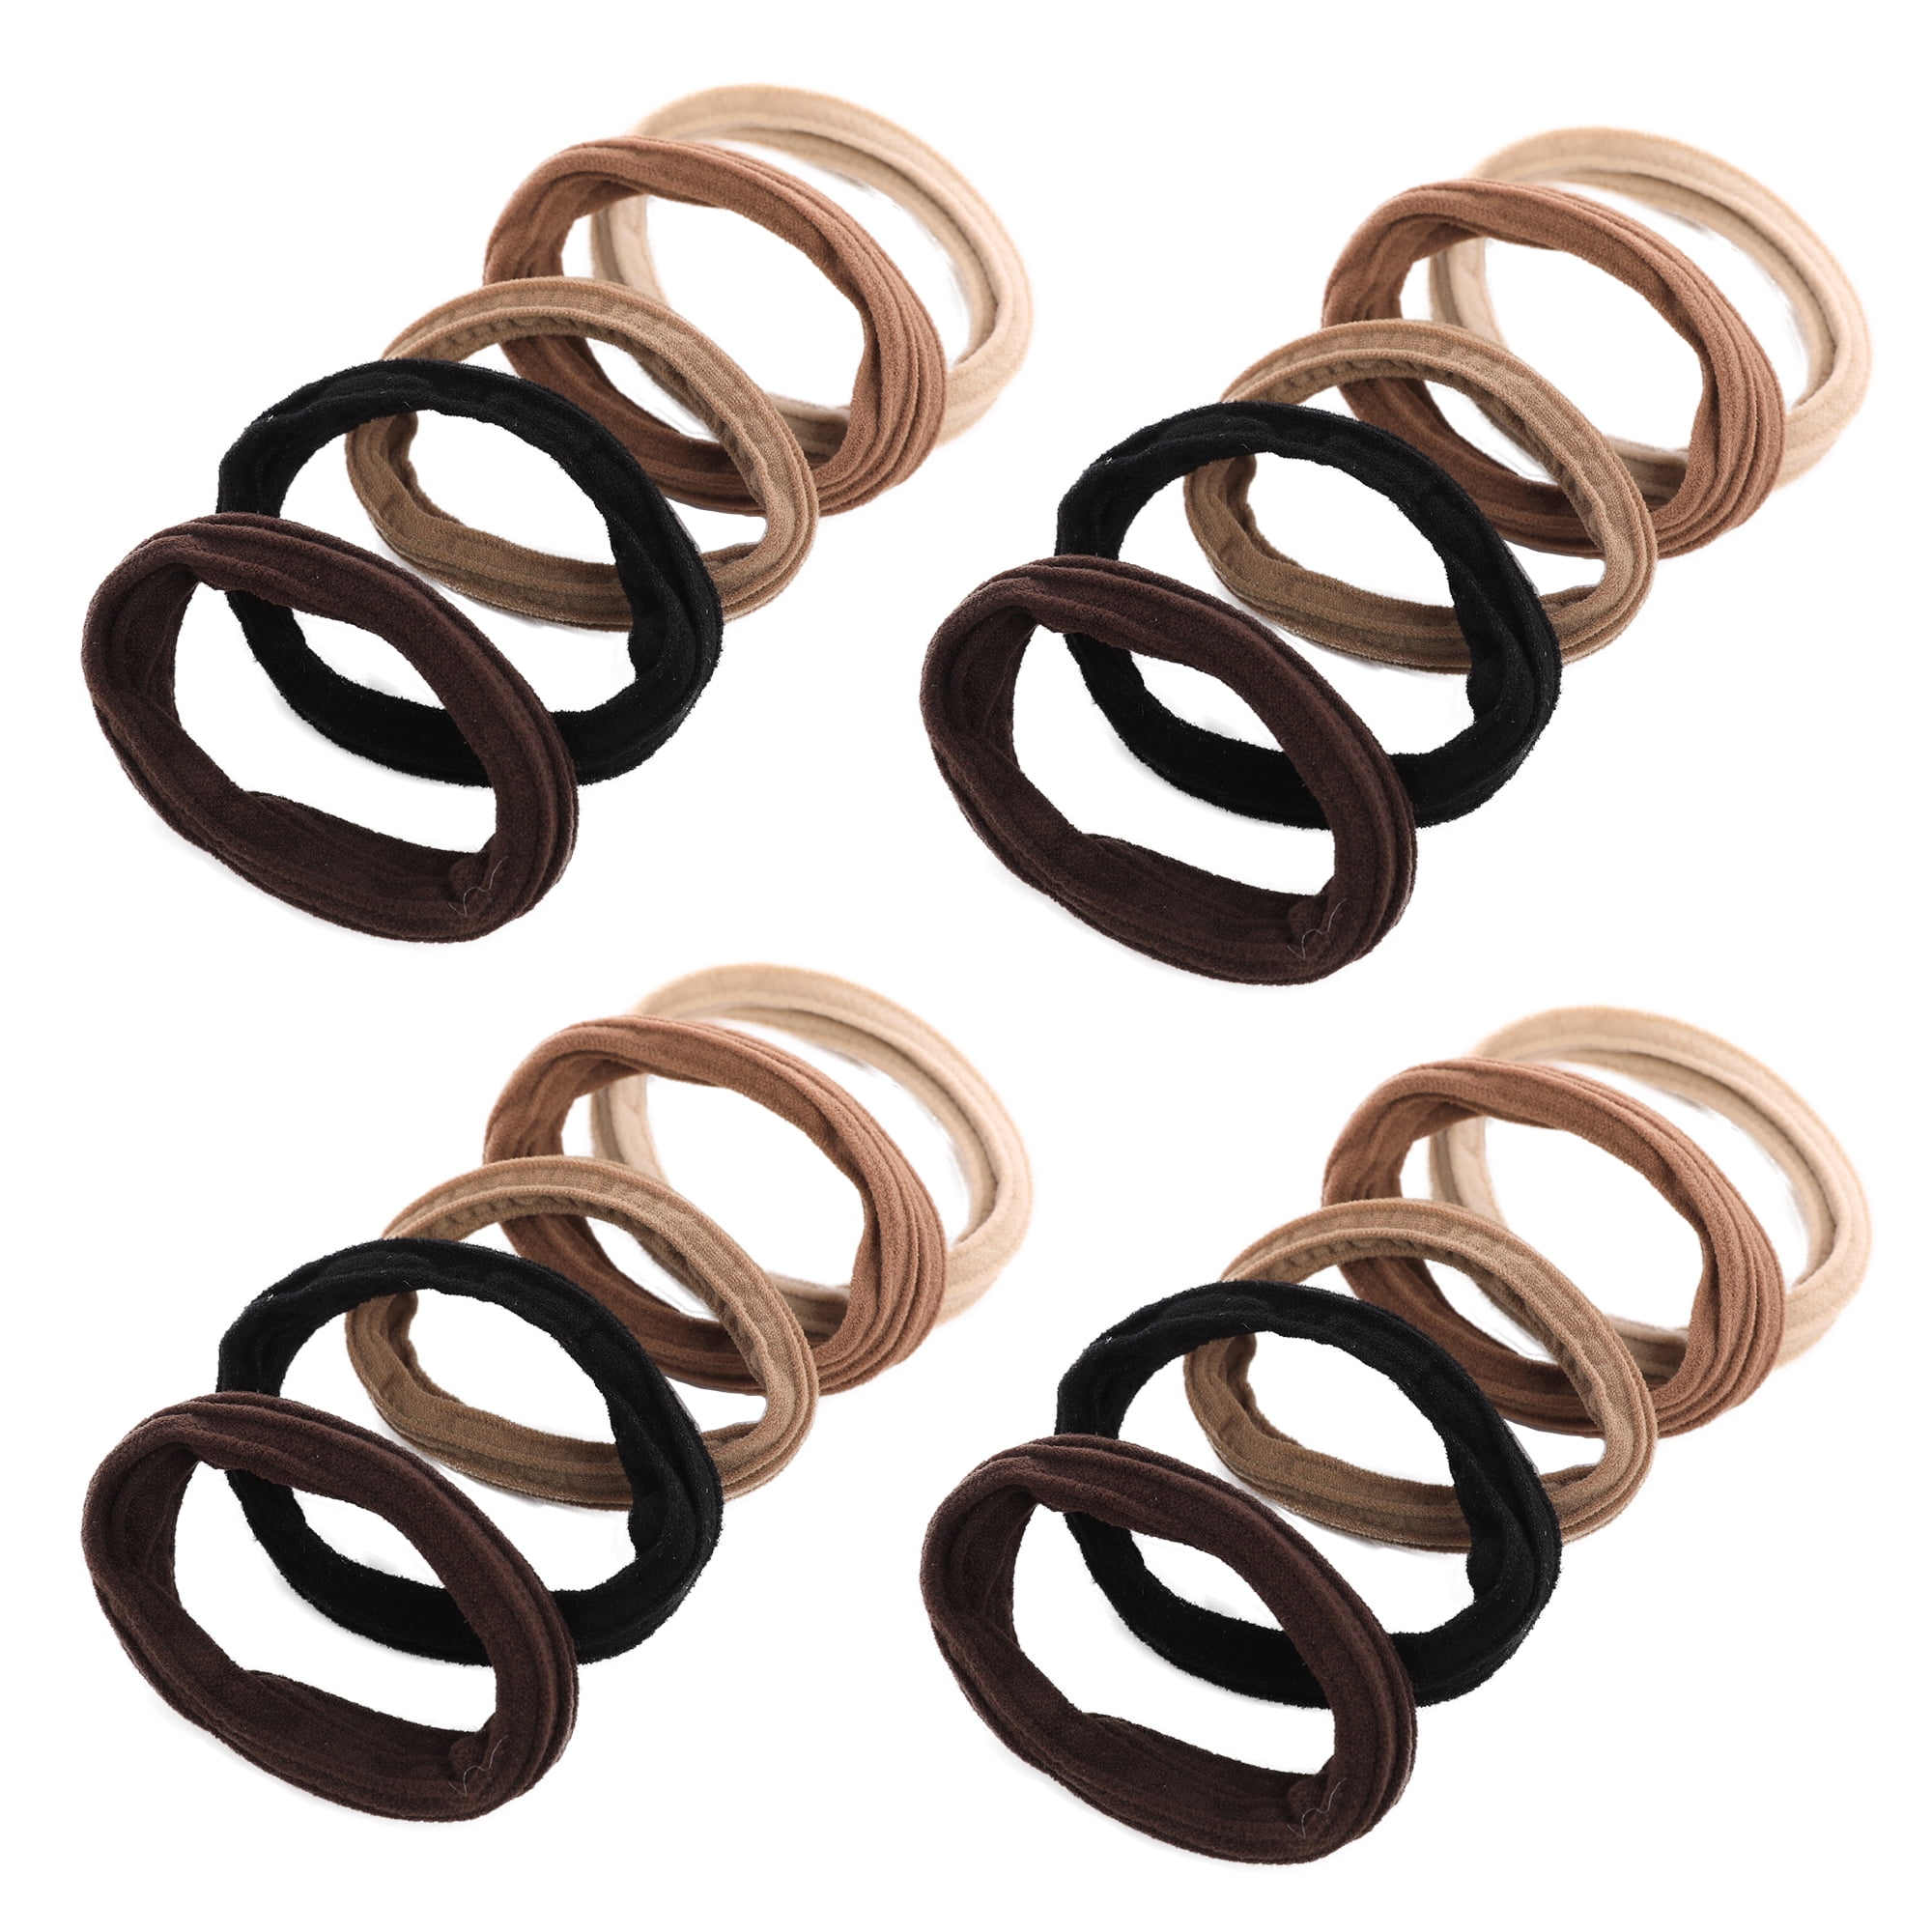 Vbruky 20PCS Hair Ties for Women Girls, Super Elastic Seamless Ponytail  Holders Hair Bands, Black Brown Scrunchies for Thick Thin Hair No Damage,  Hair Accessories 